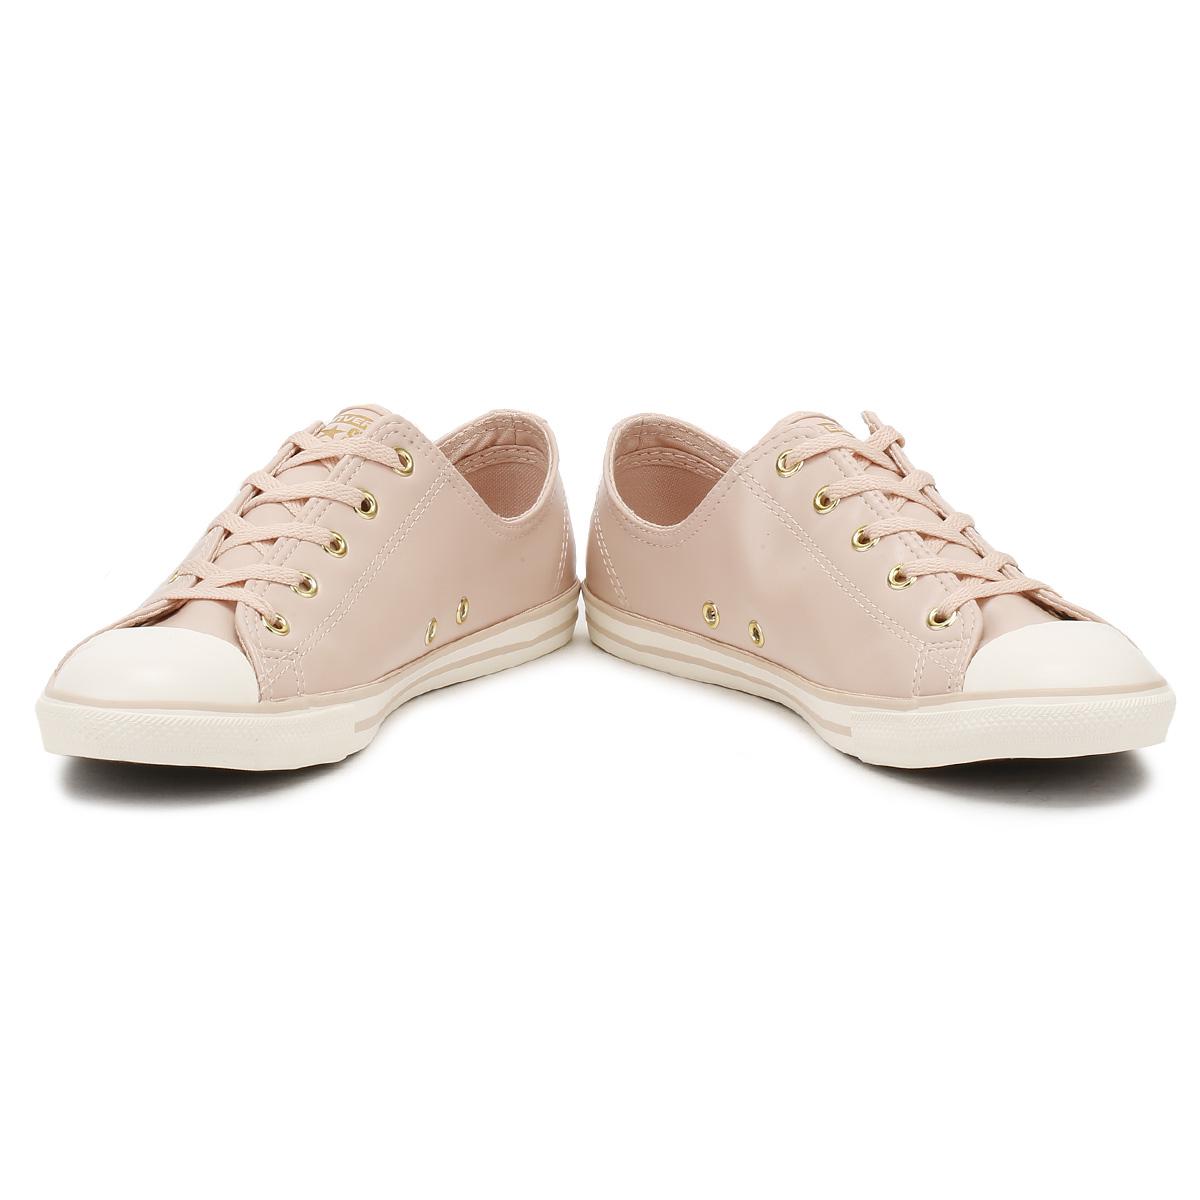 converse dainty pink leather